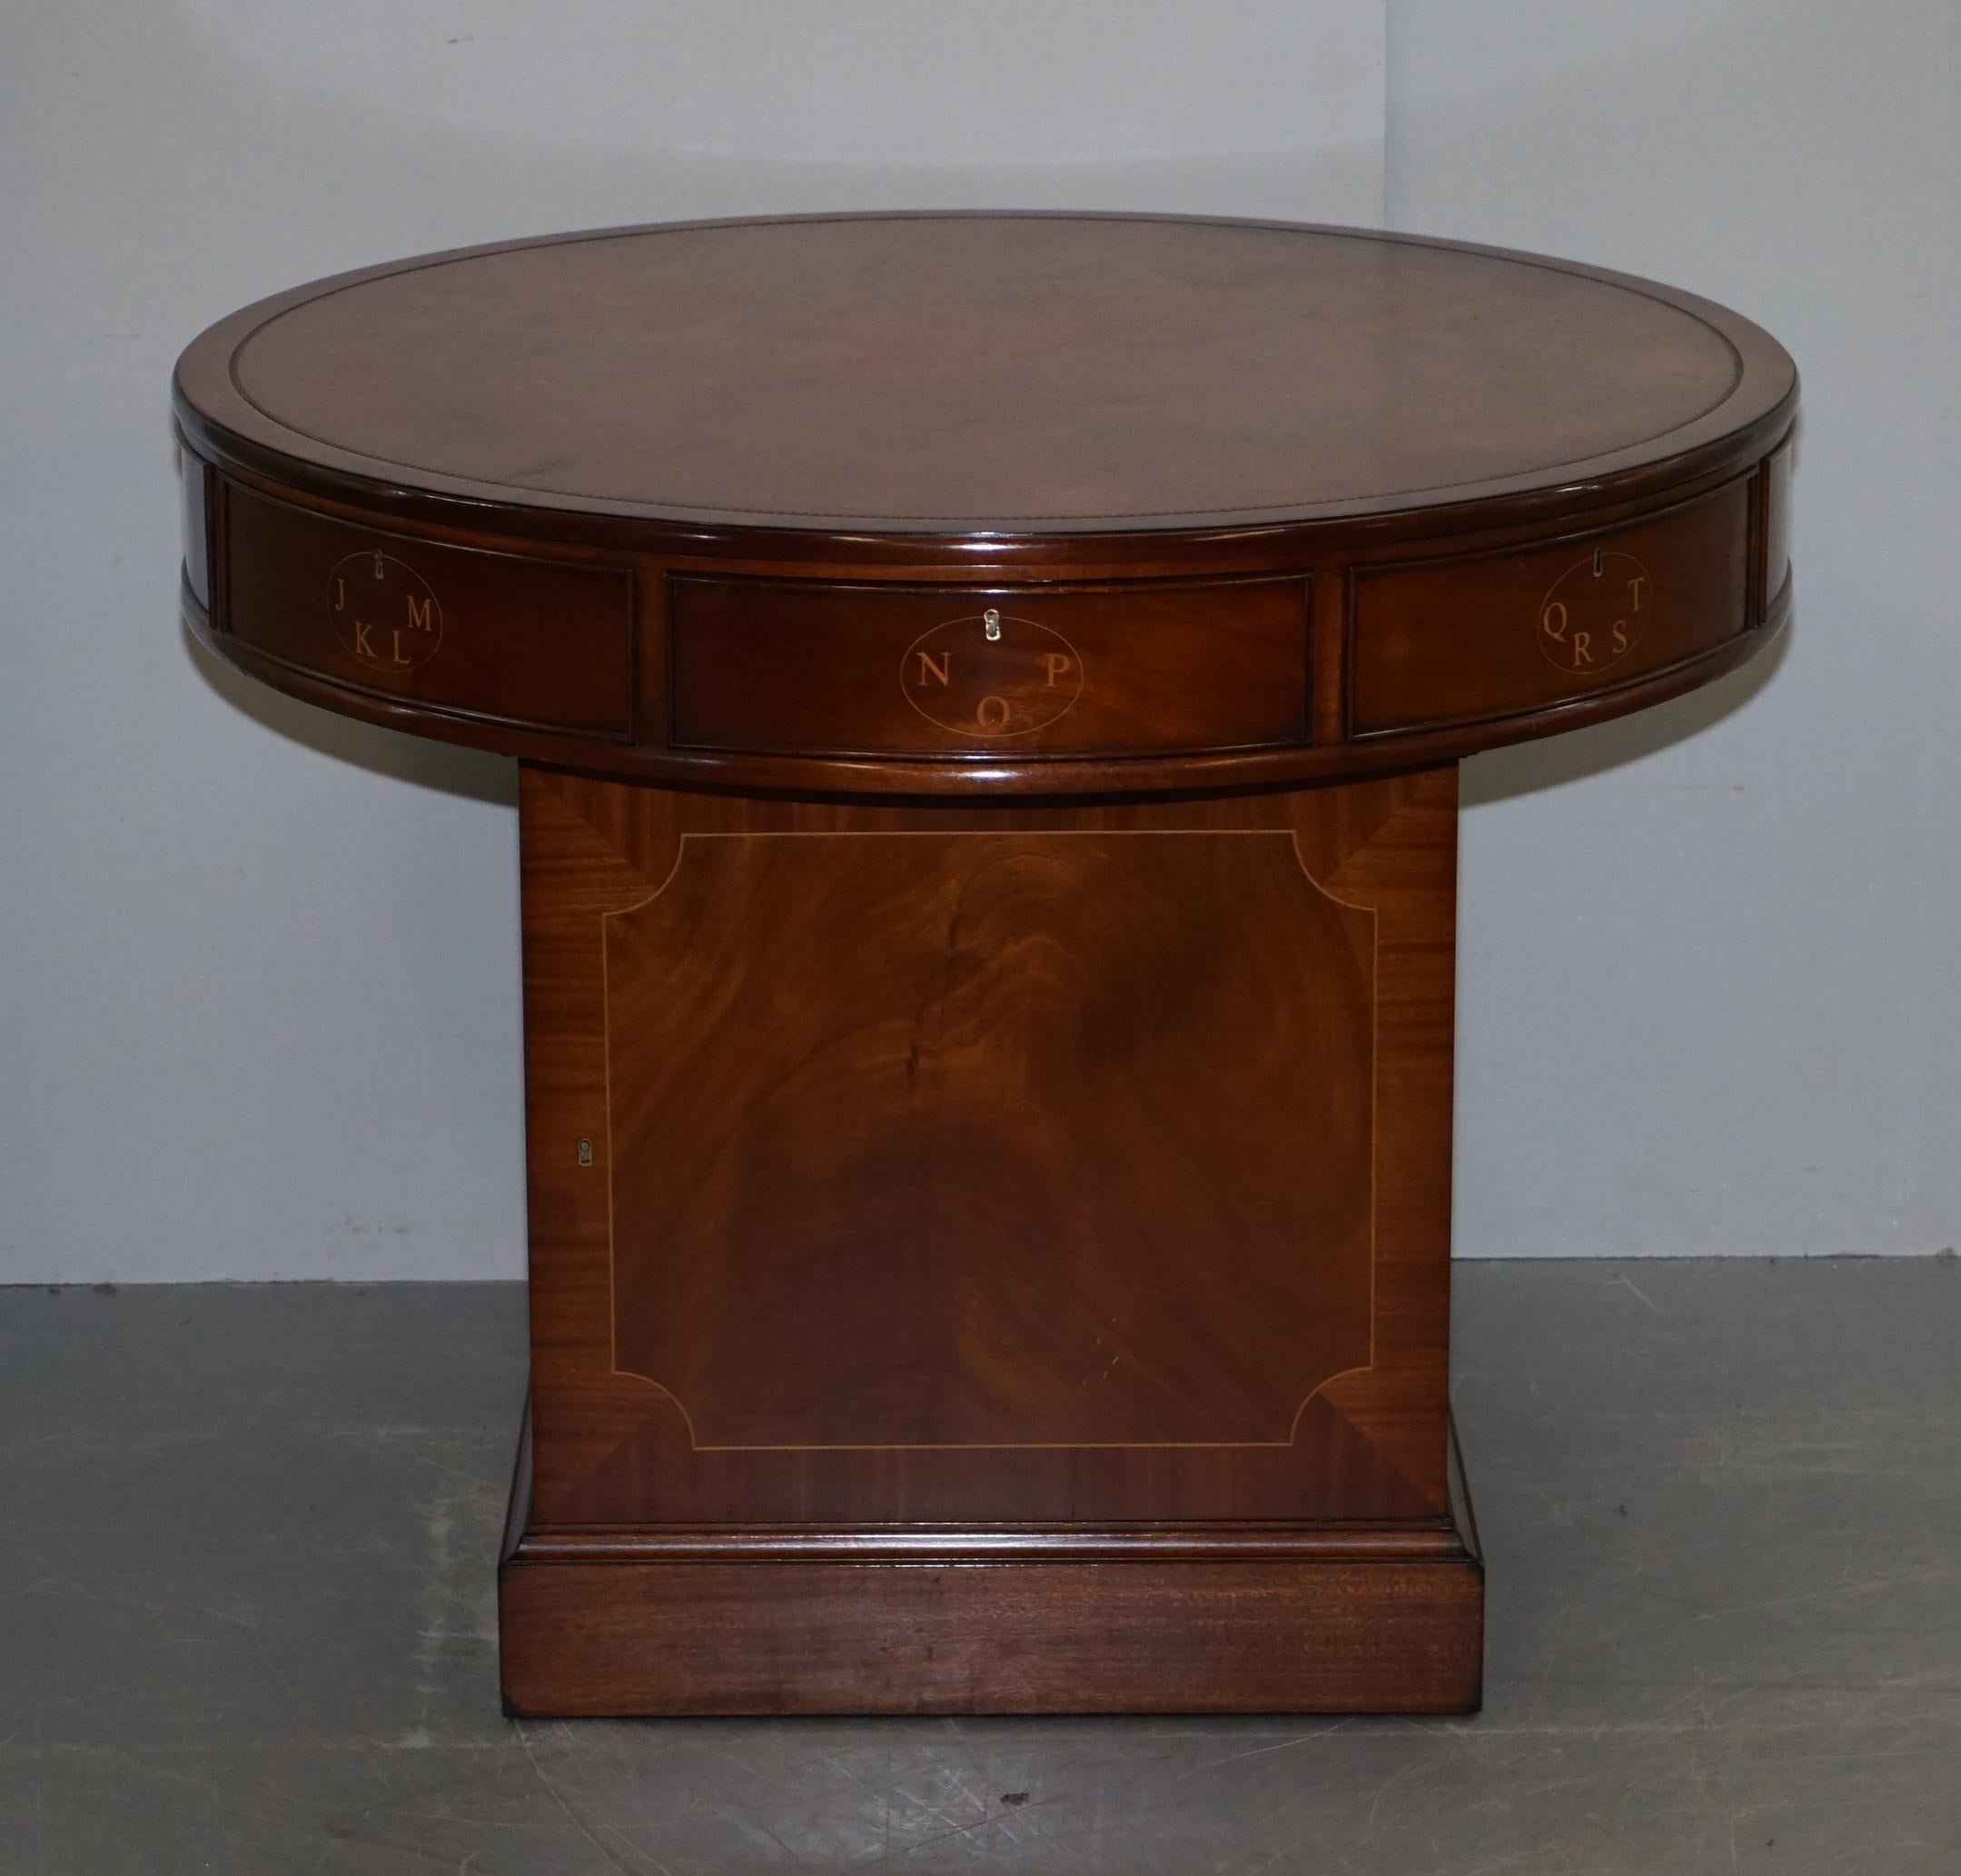 We are delighted to offer for sale this exquisite vintage flamed mahogany with hand dyed brown leather top “Rent” table

This is a very fine piece of furniture indeed. The originals date back to the late 18th century circa 1780 and retail around